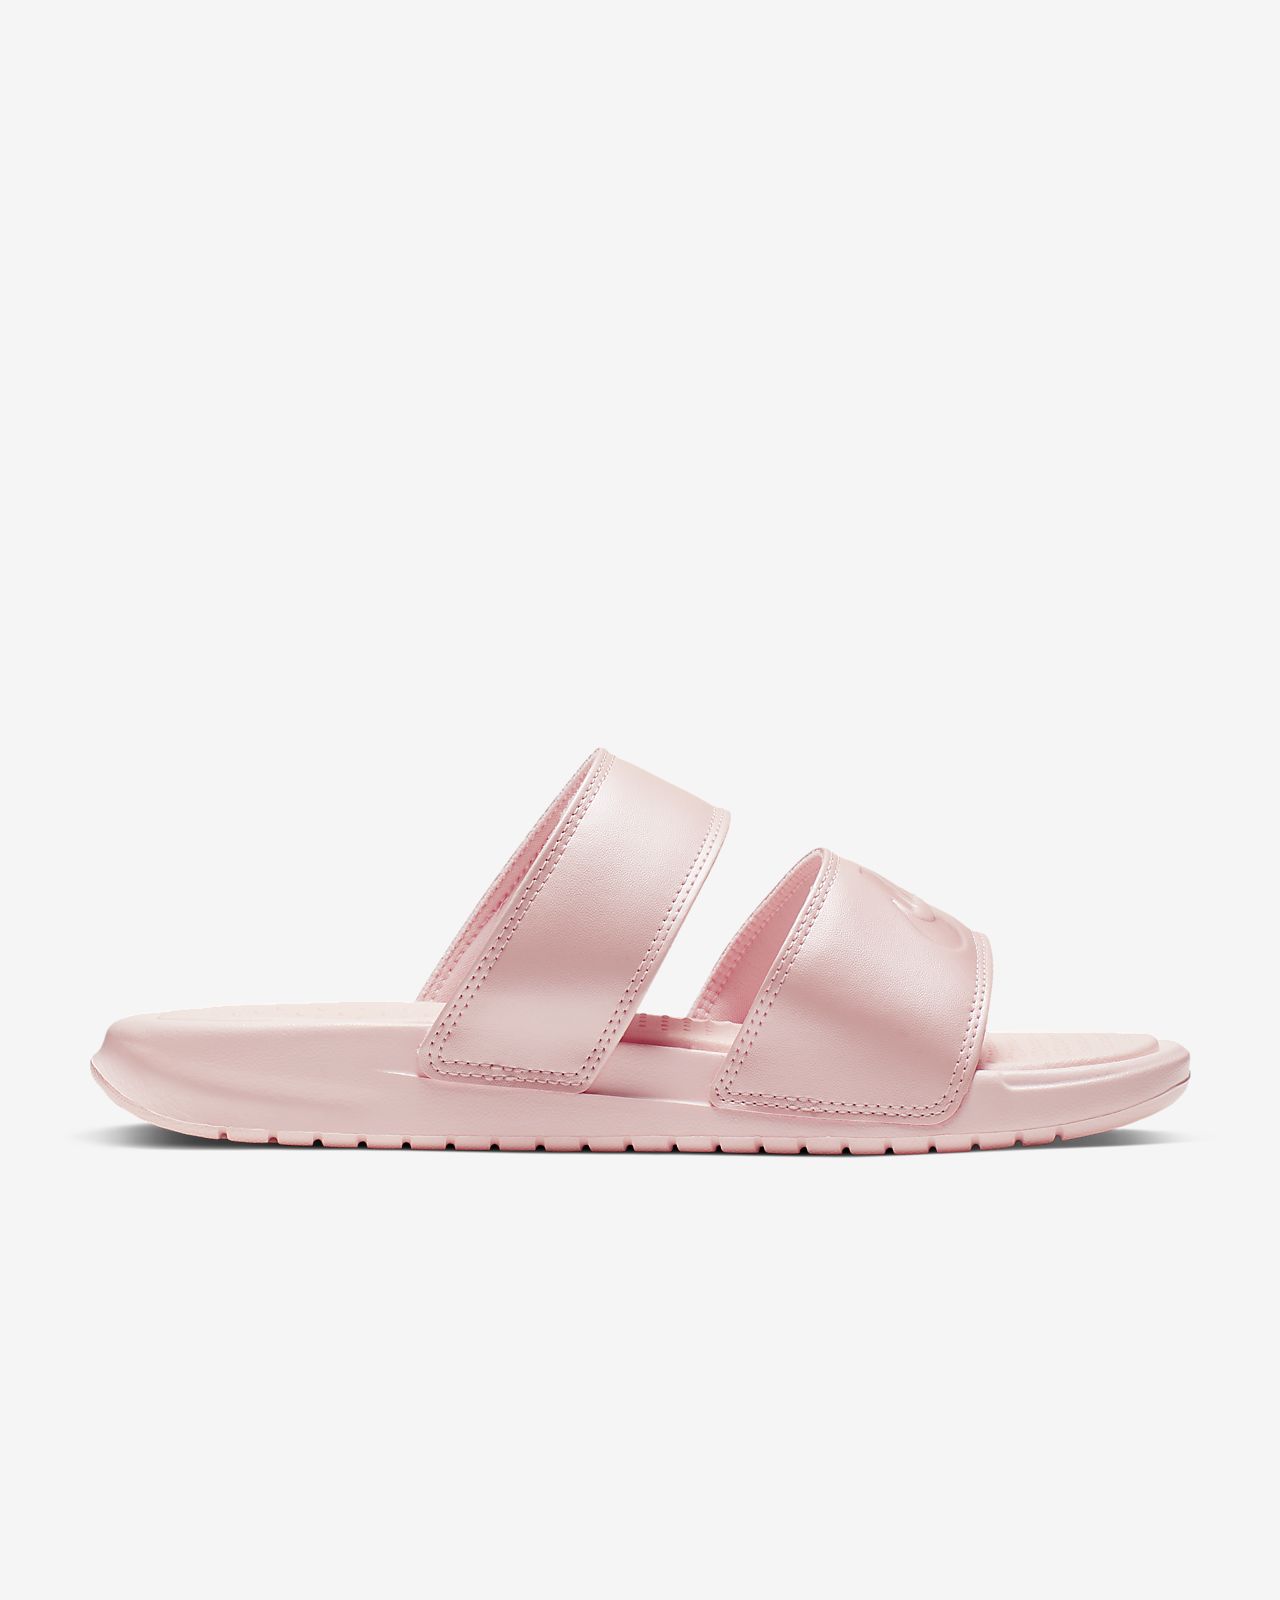 nike slides with strap on the back